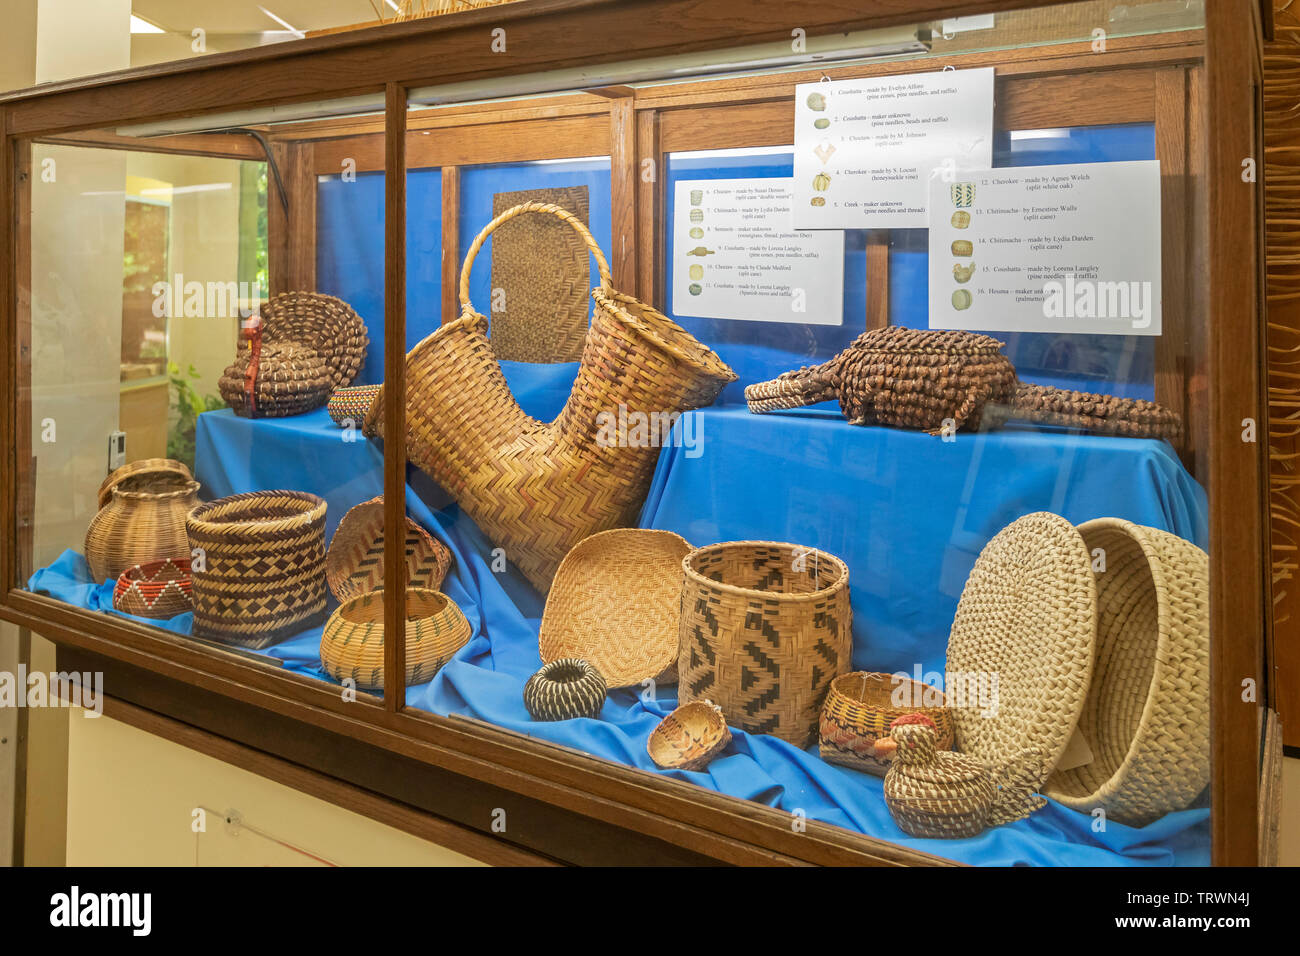 Natchez, Mississippi - A display of baskets at the museum at the Grand Village of the Natchez Indians, the main ceremonial area for the Natchez Indian Stock Photo